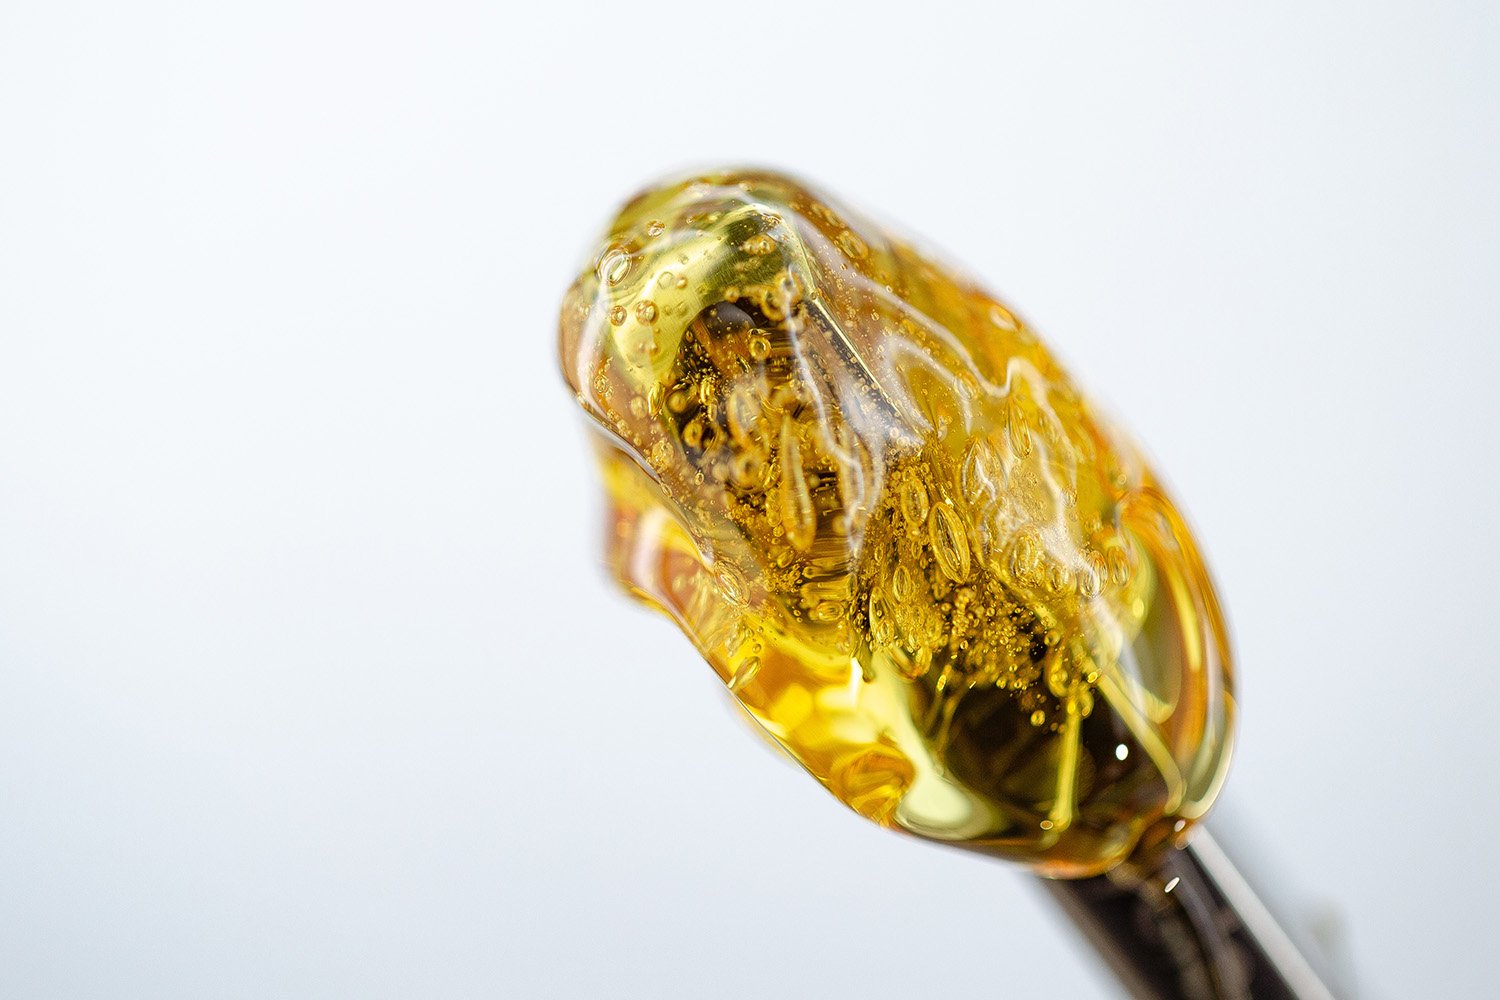 Elevate Your Cannabis Experience with Delta 8 Live Resin: A Potent, Pure, and Clean Alternative